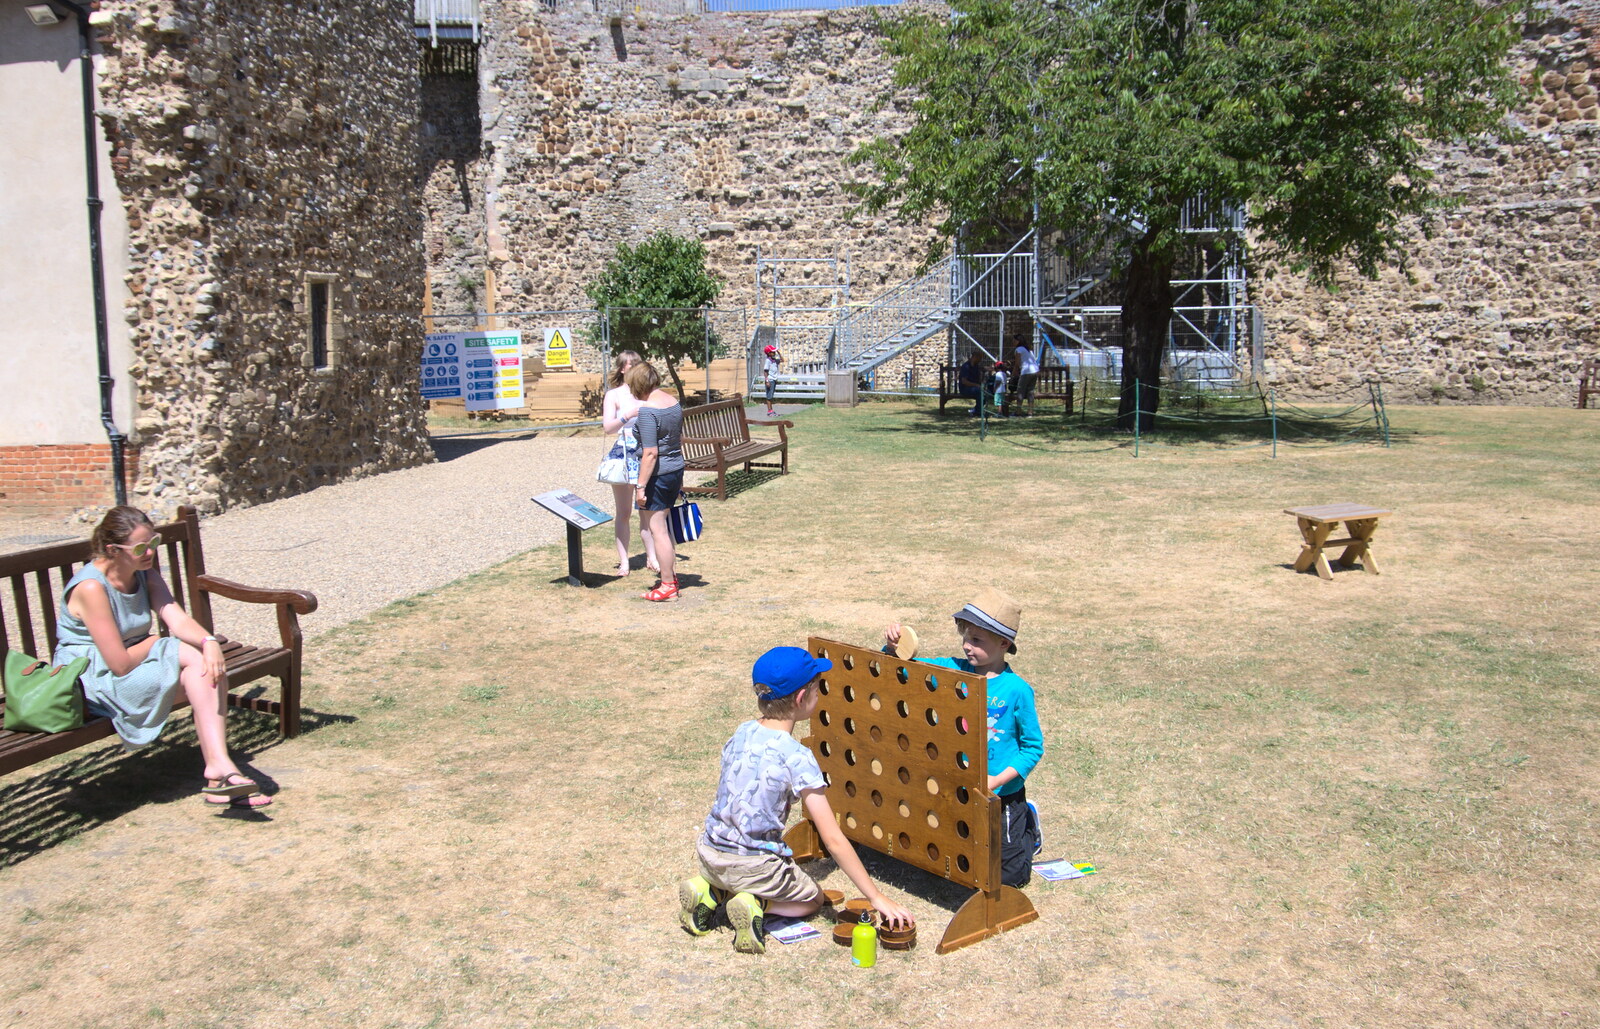 Isobel looks on as the boys play from A Postcard from the Castle on the Hill, Framlingham, Suffolk - 14th July 2018